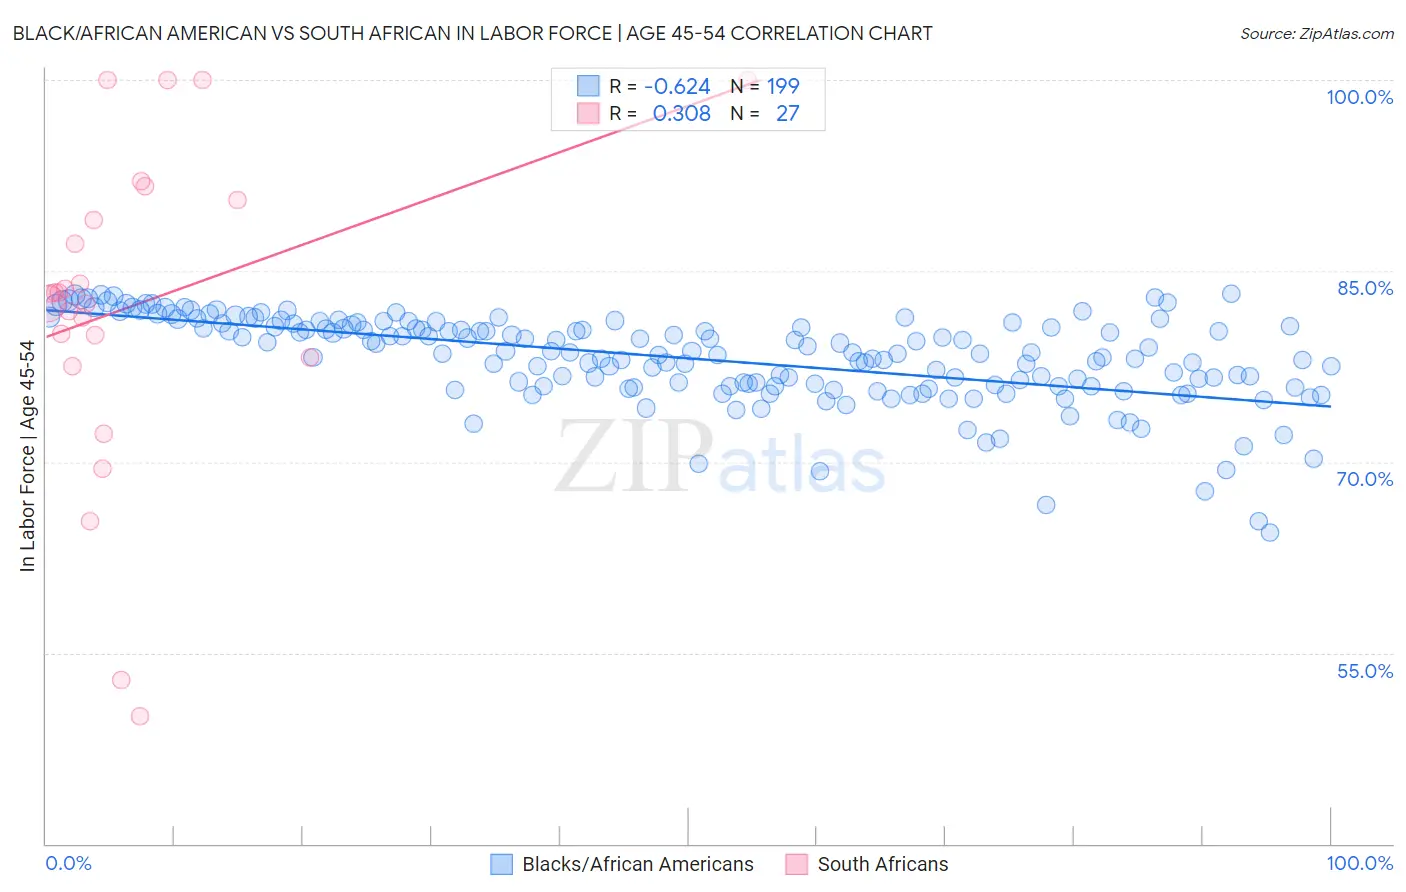 Black/African American vs South African In Labor Force | Age 45-54